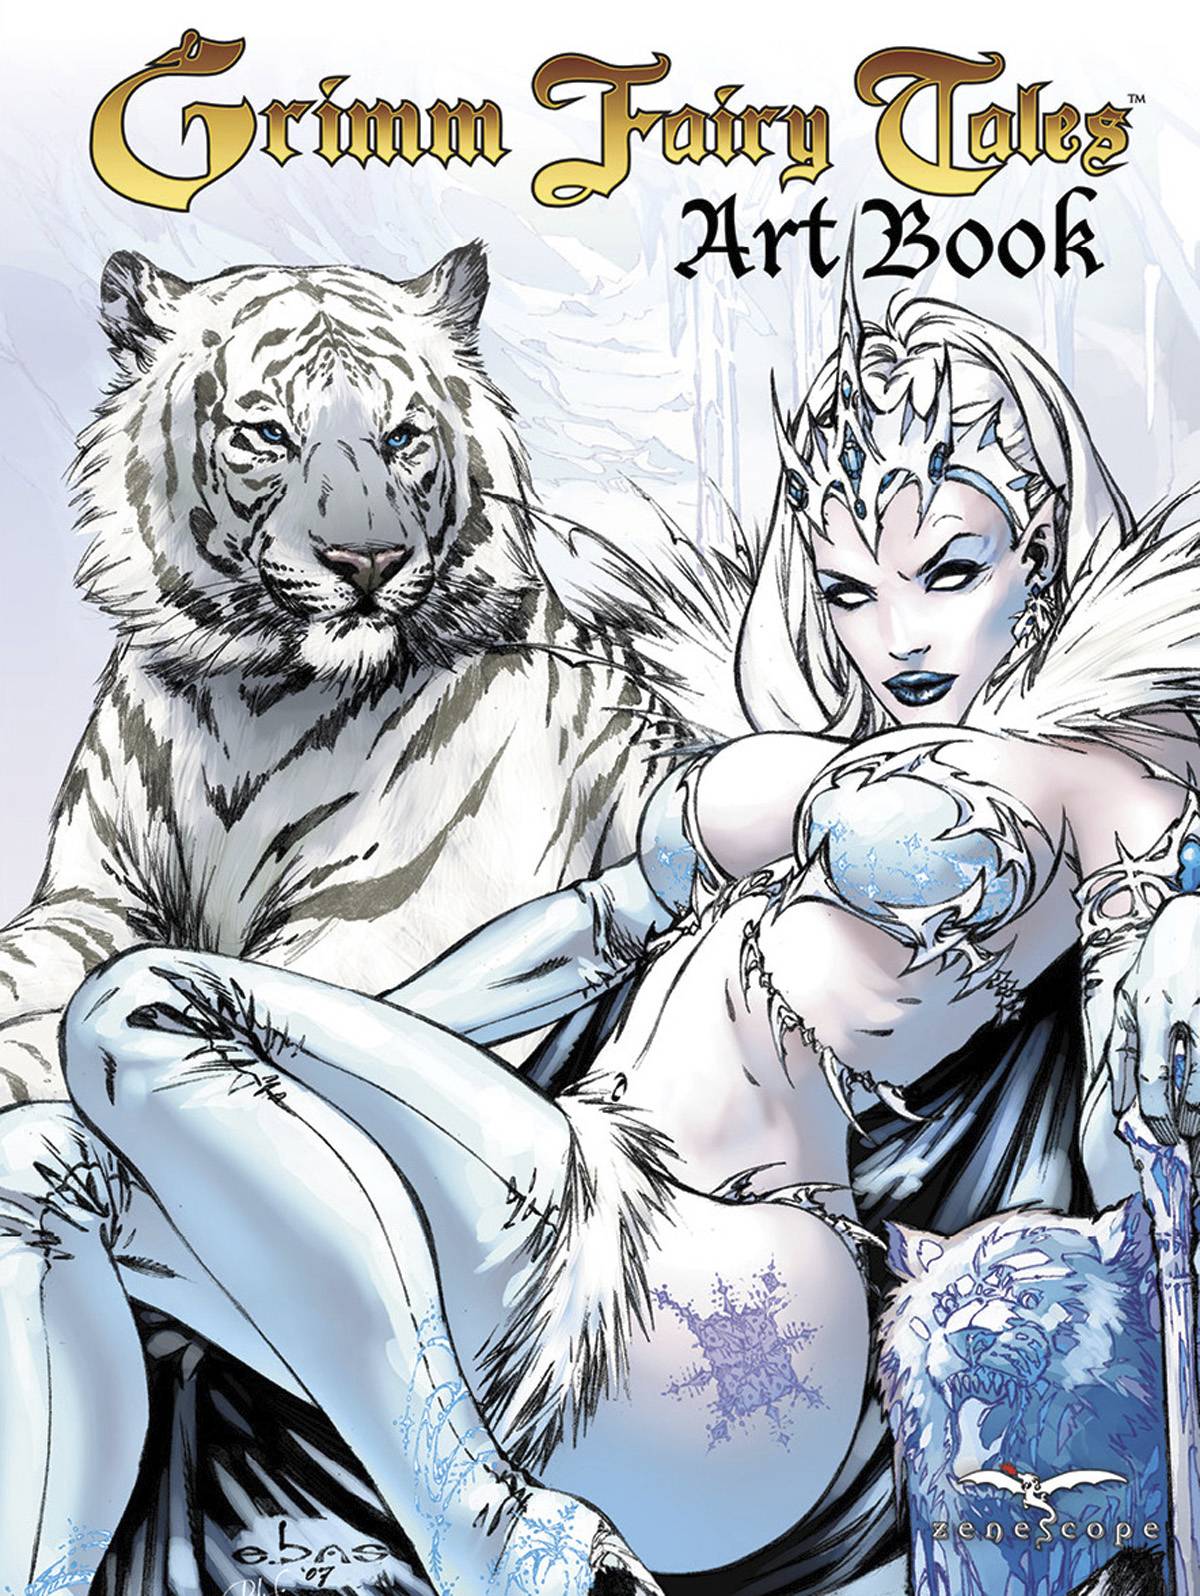 Grimm Fairy Tales Cover Art Hardcover Volume 1